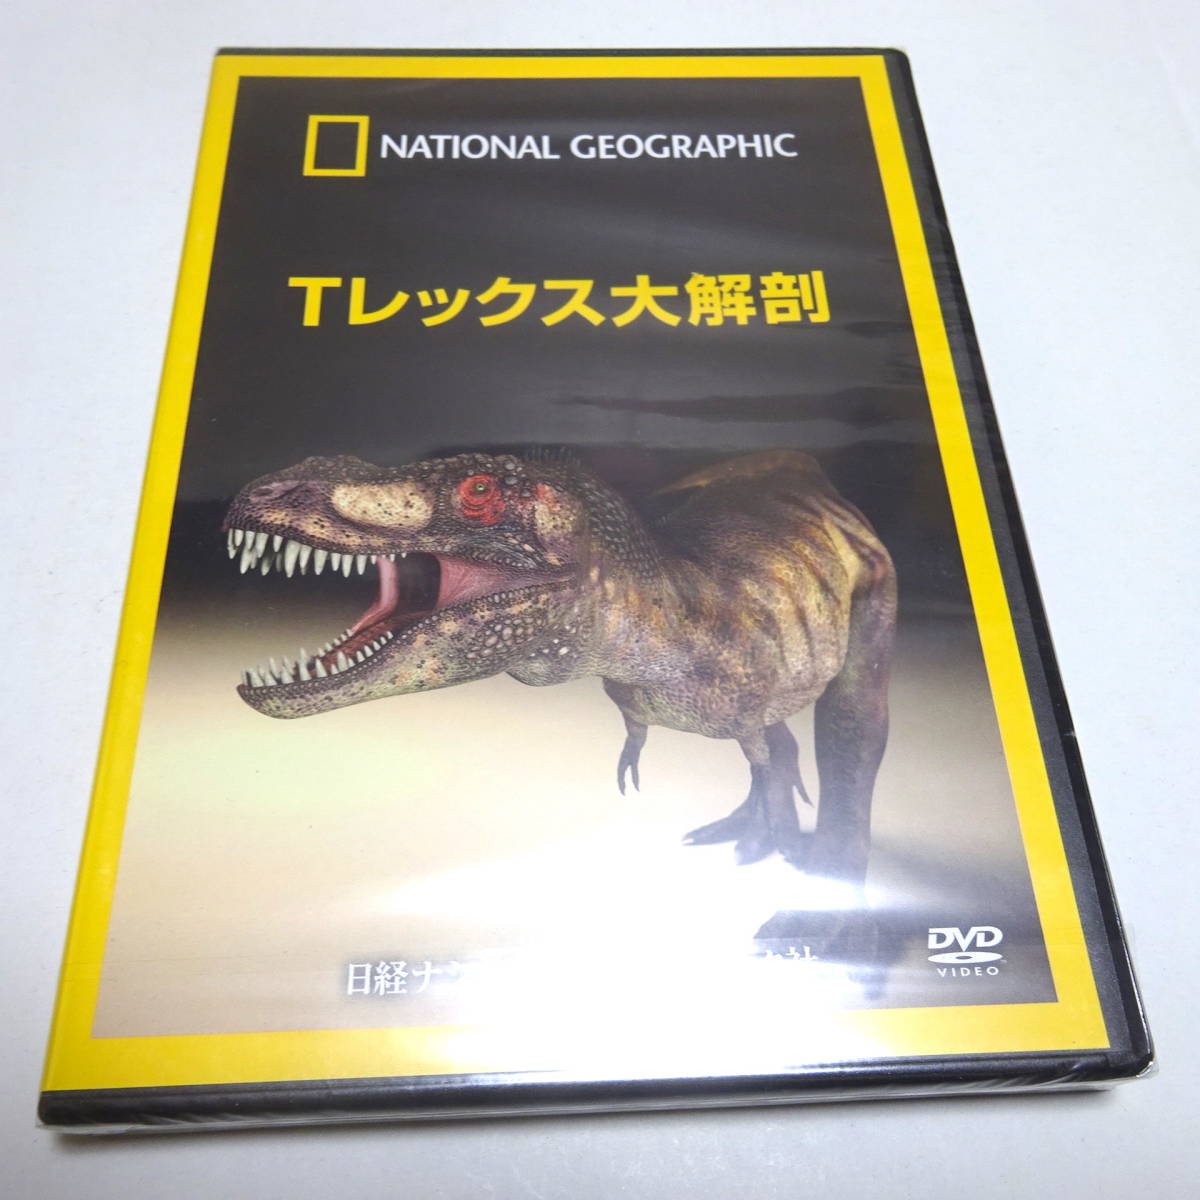  prompt decision unopened DVD[T Rex large anatomy prompt decision ] National geo graphic / dinosaur 